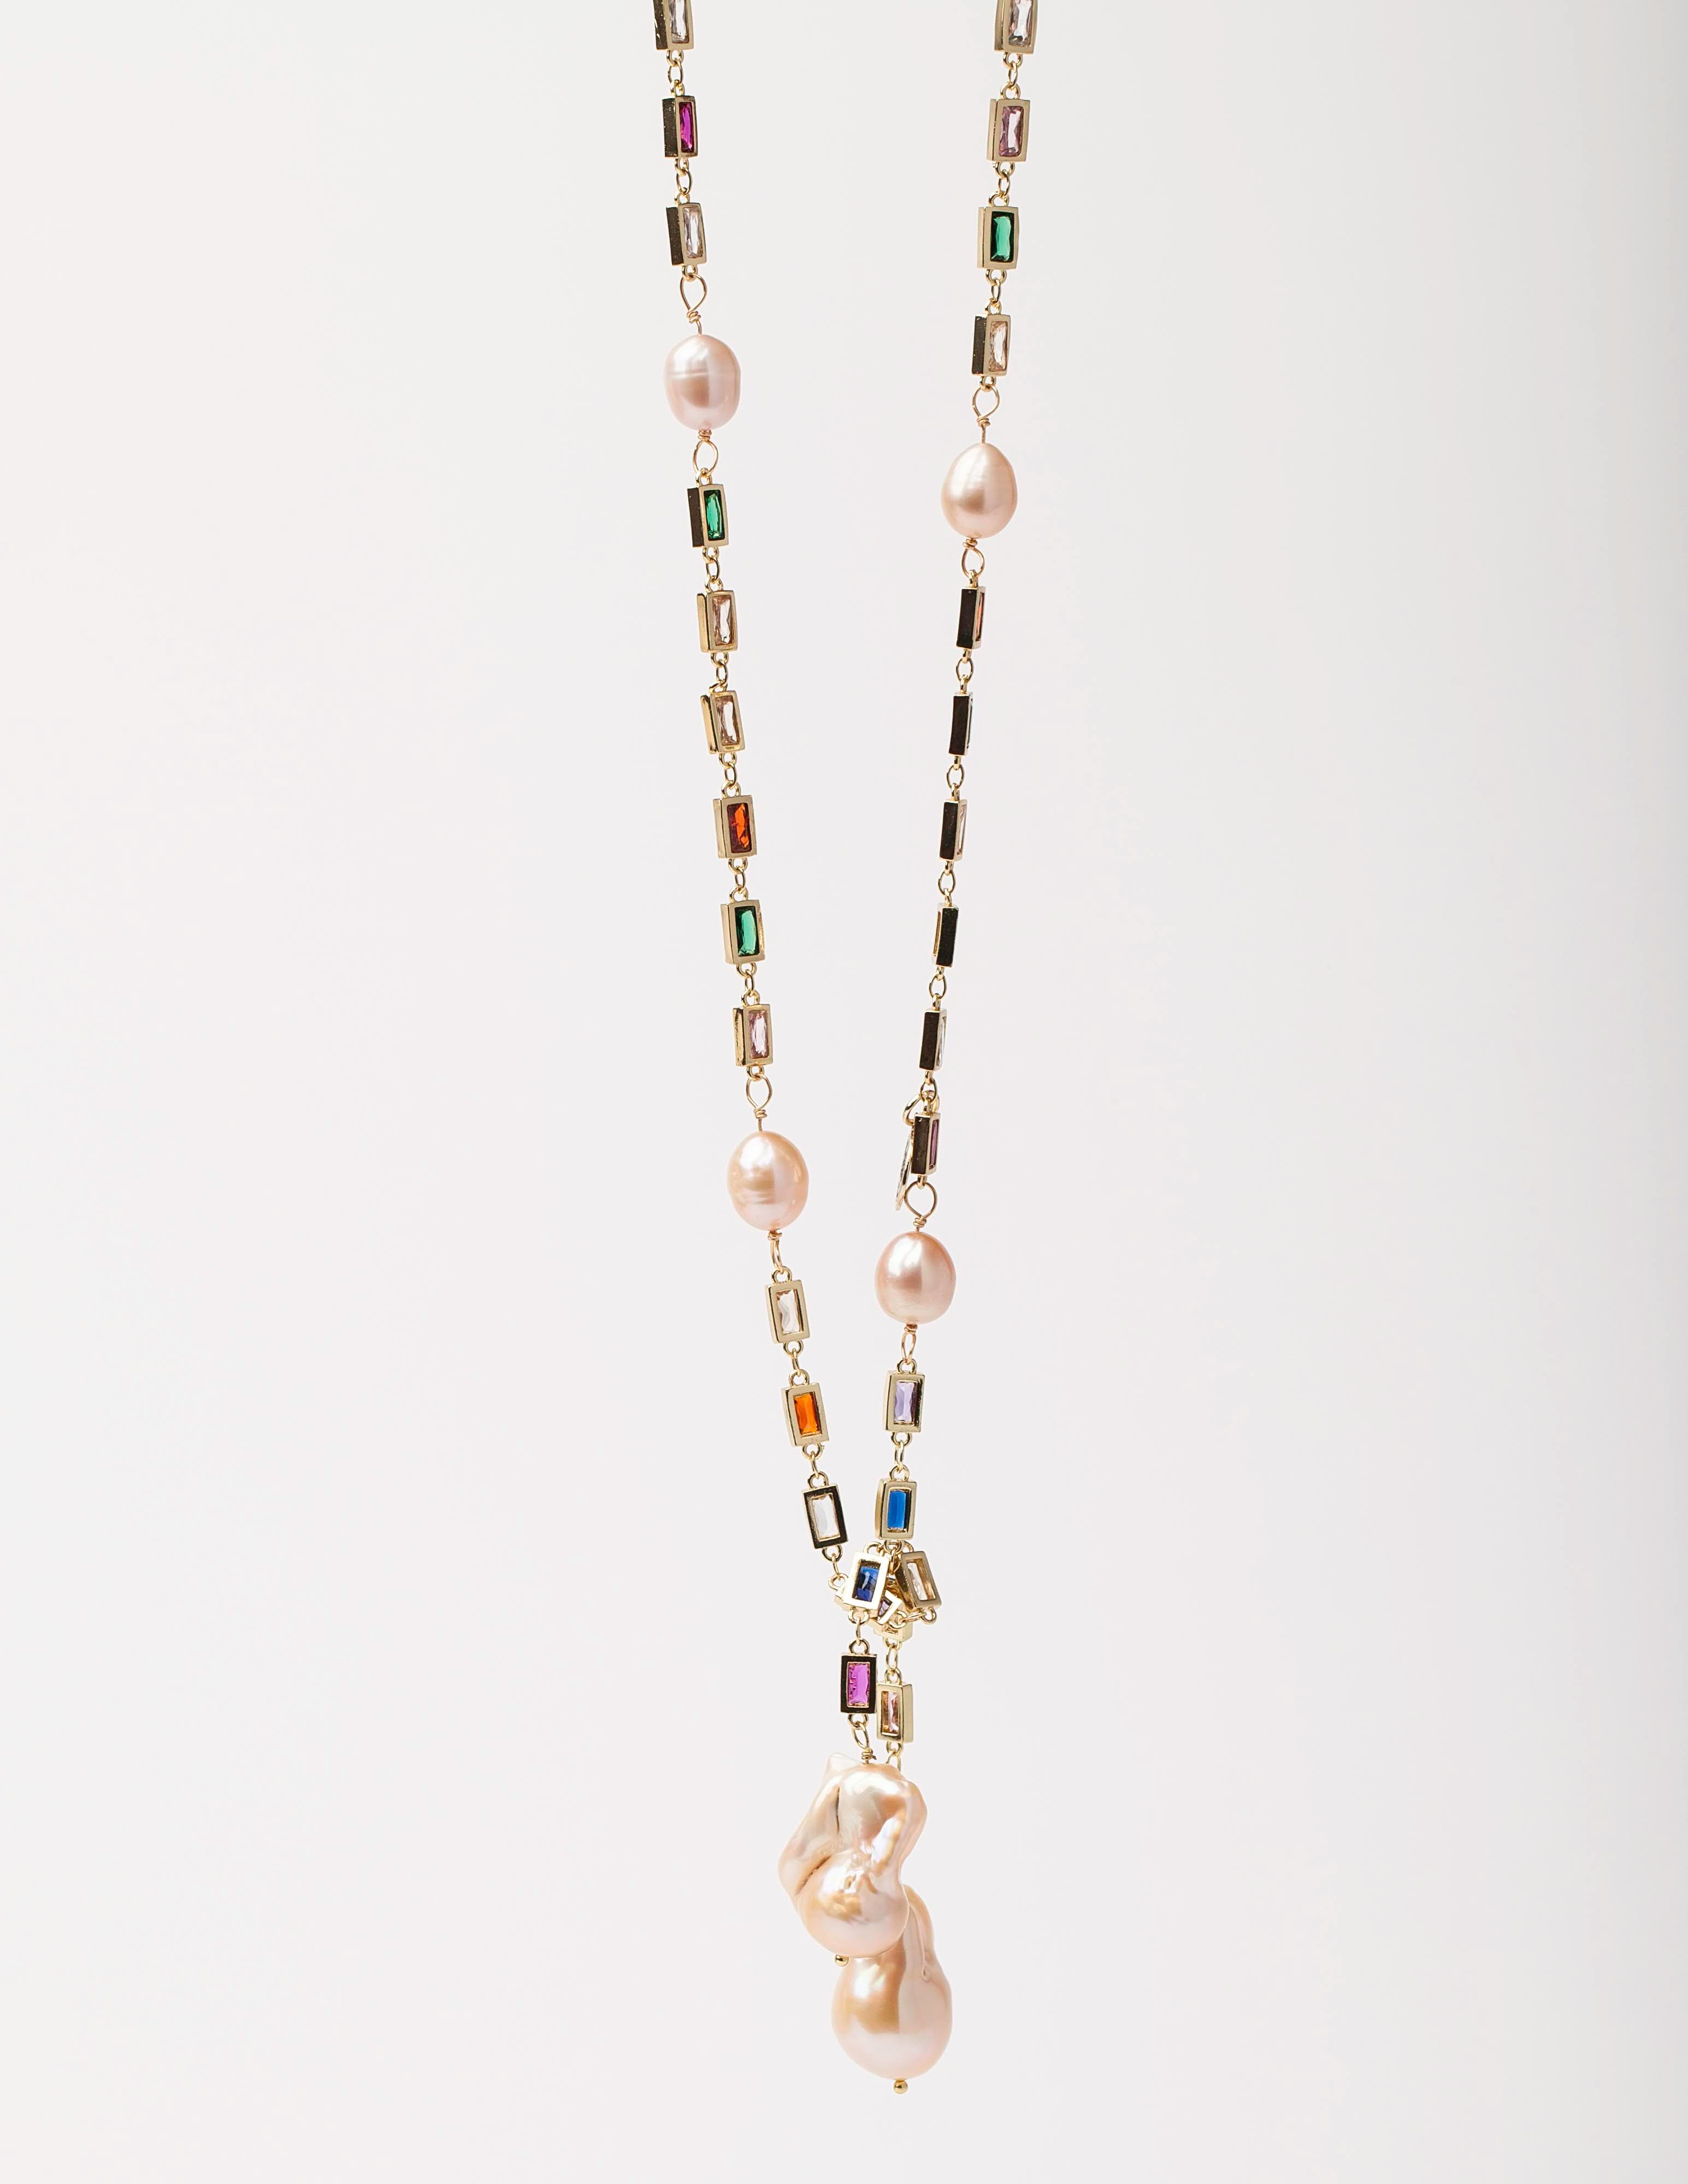 Peach Imitation Pearl, Red Gripoix Glass, Gold Metal and Strass Lariat  Necklace, 1981-1985 | Handbags & Accessories | The Chanel Collection | 2022  | Sotheby's